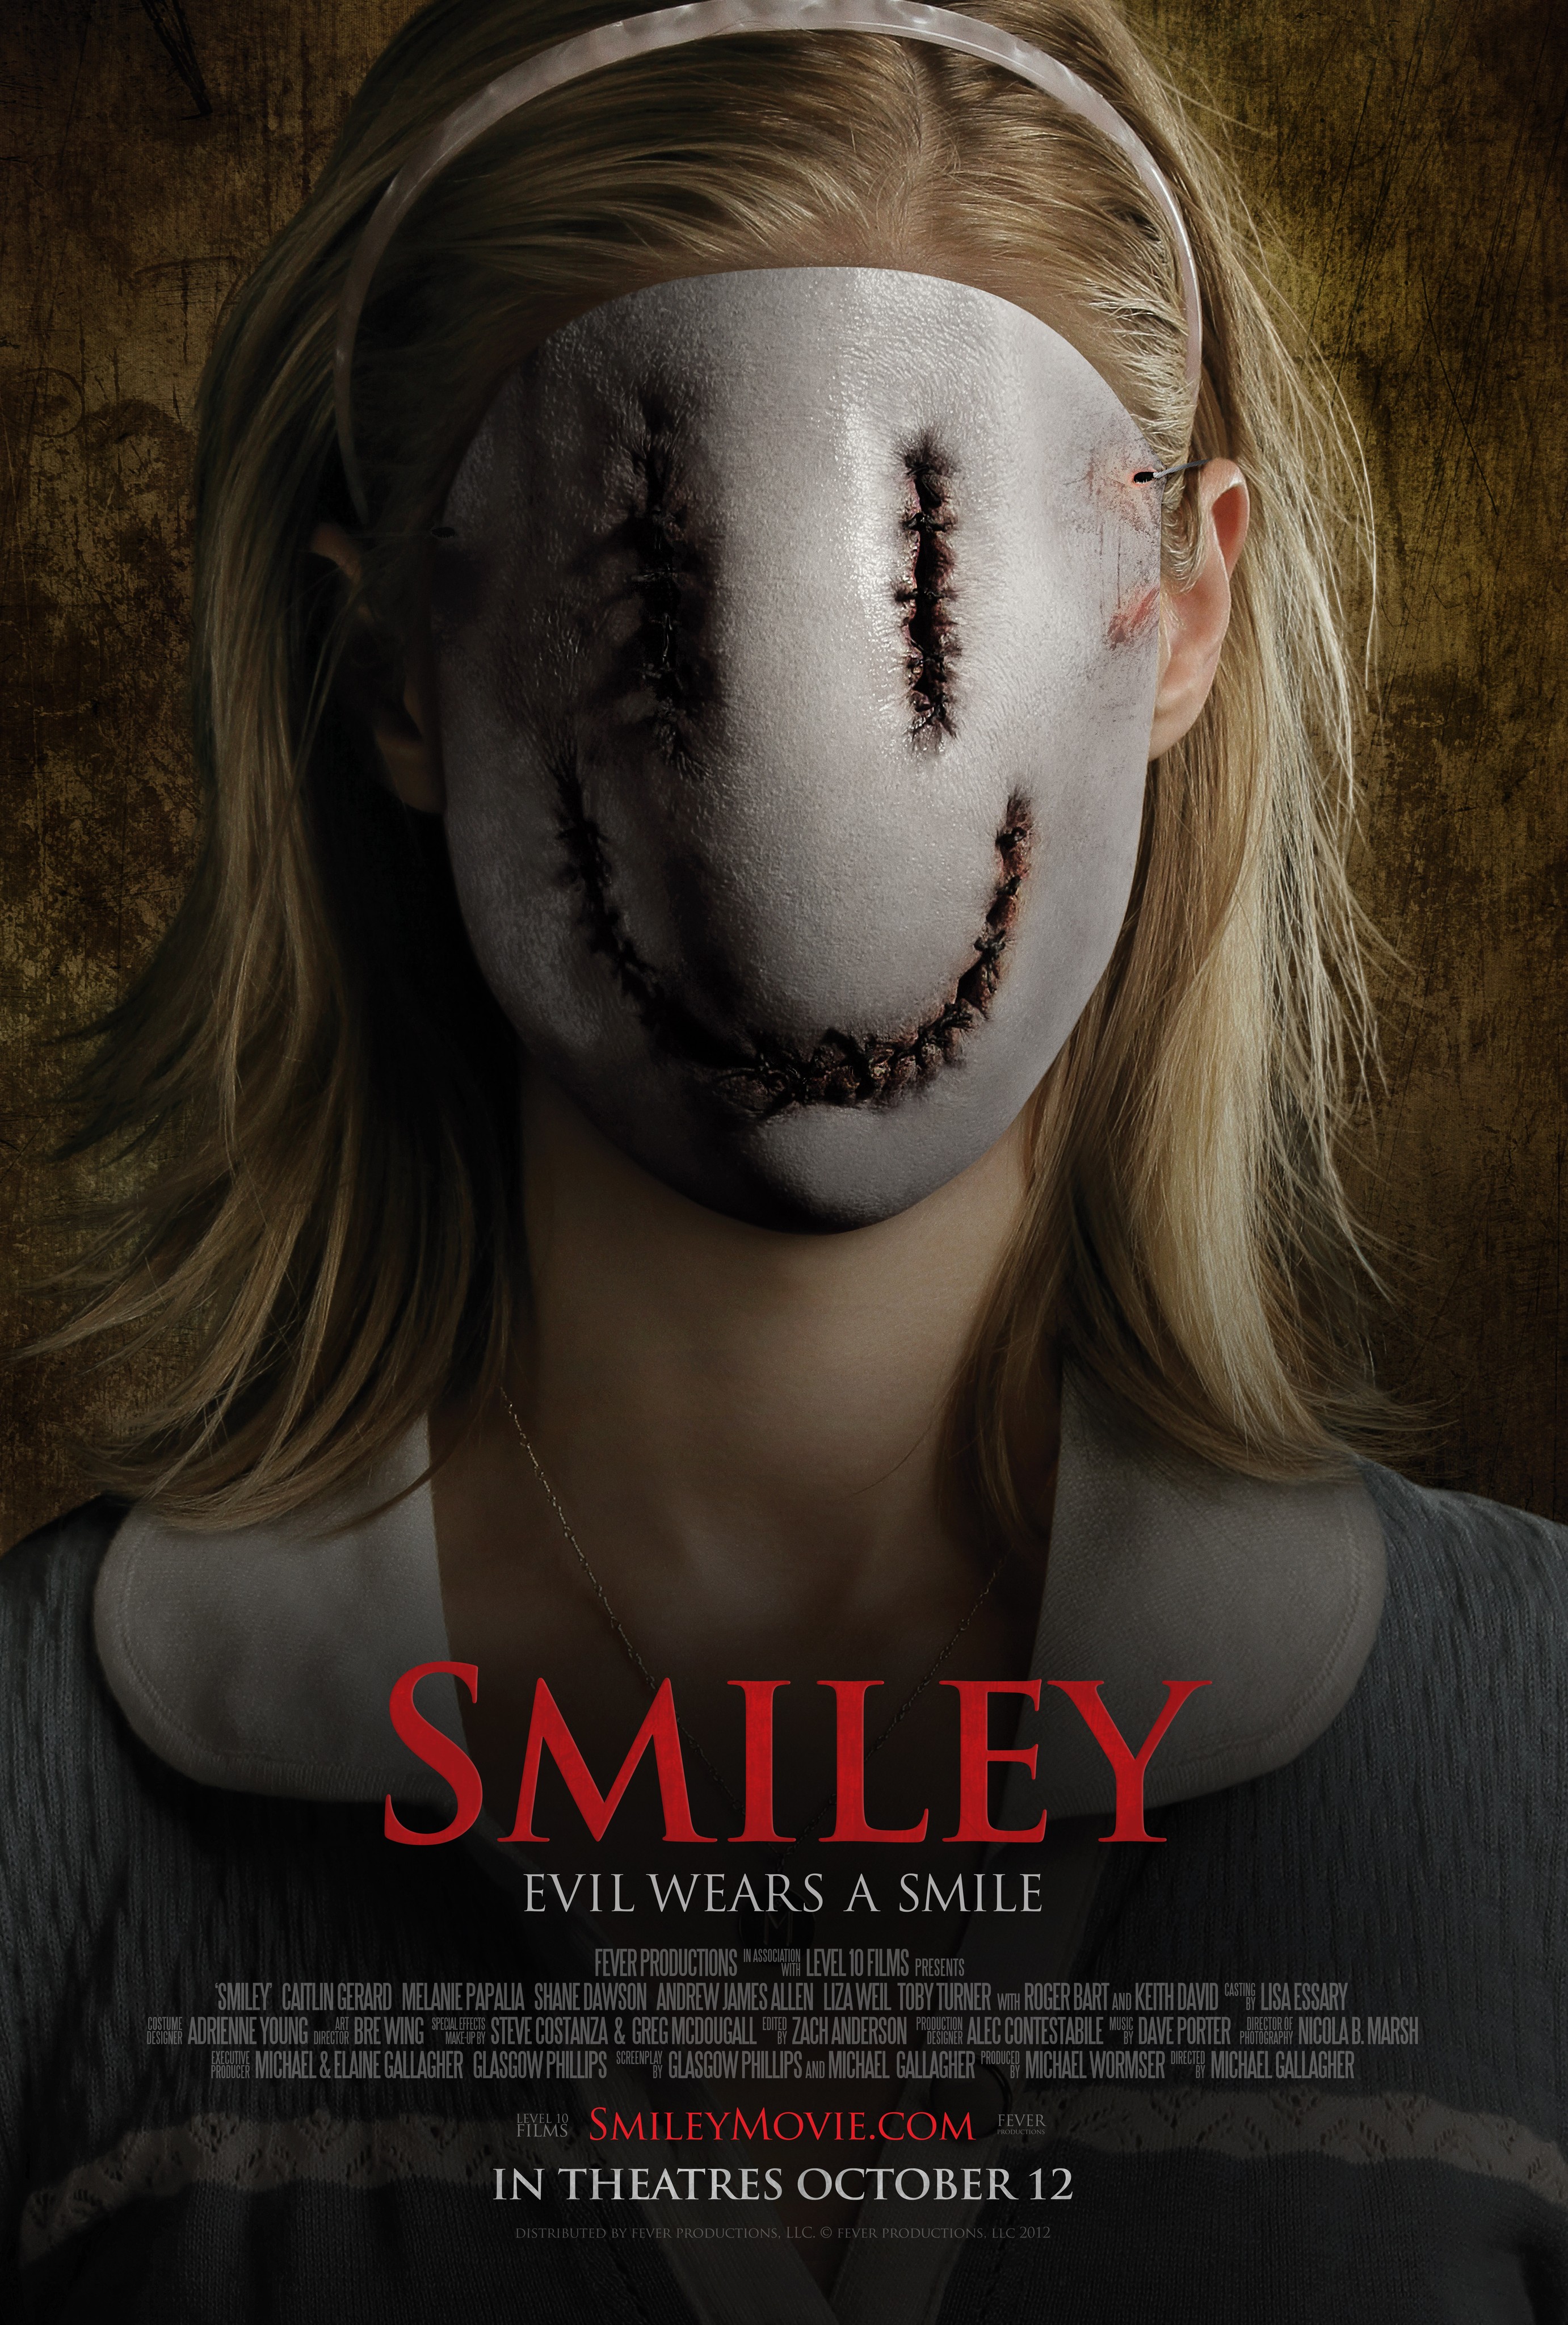 scary smiley face movie